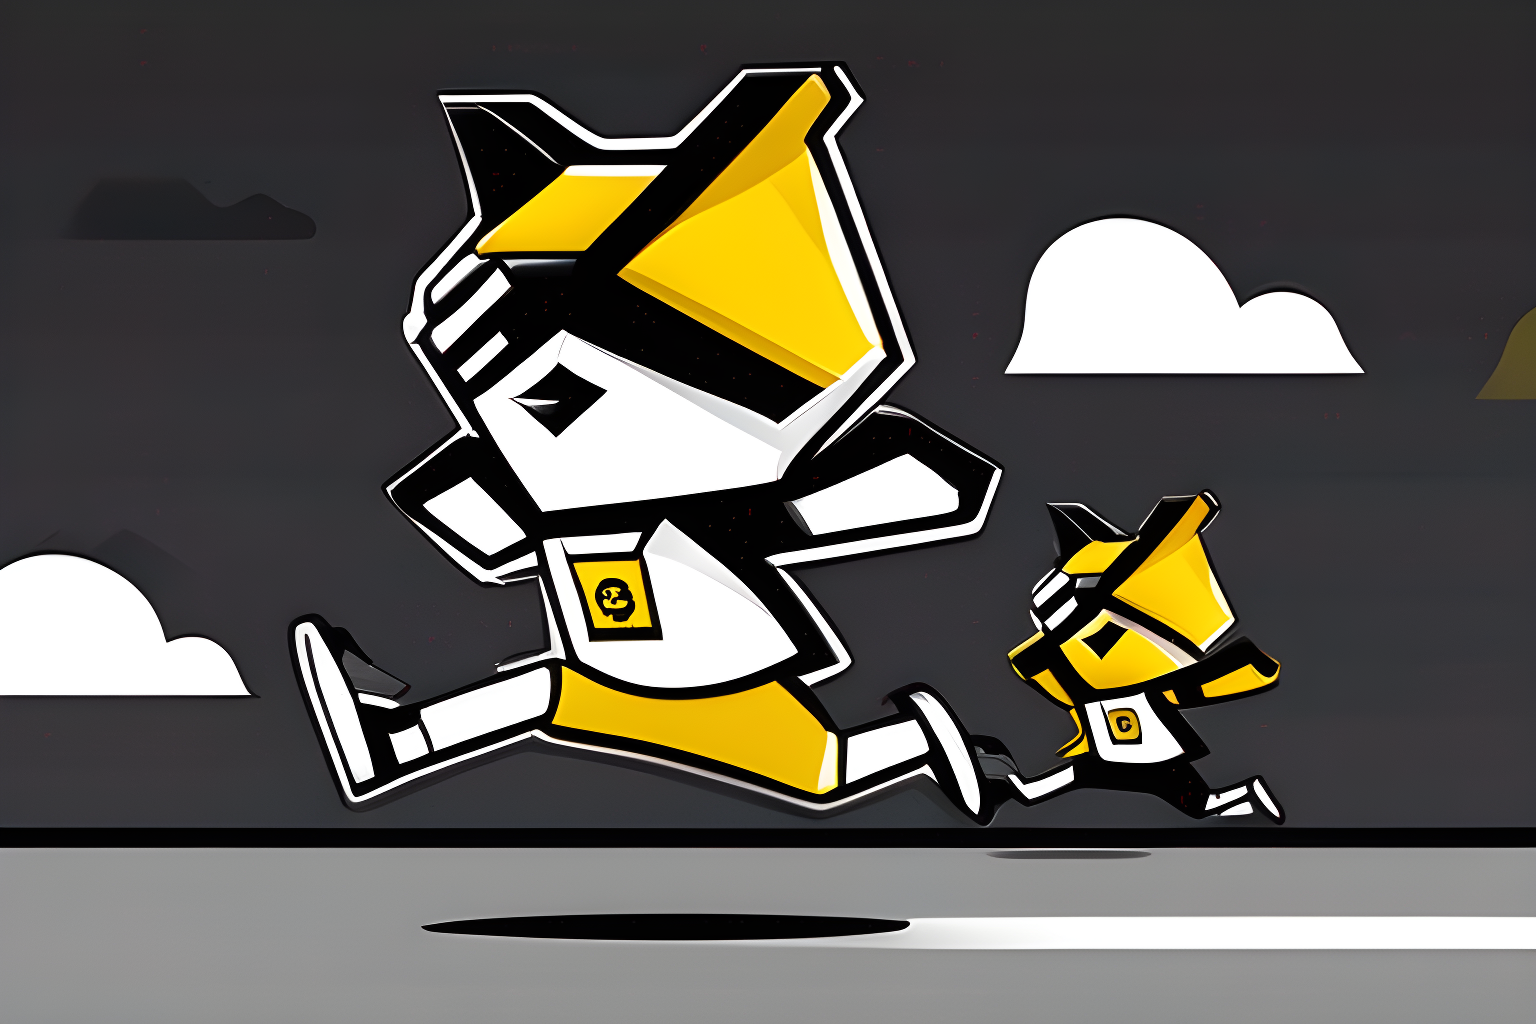 Illustrate a mascot for binance being chased